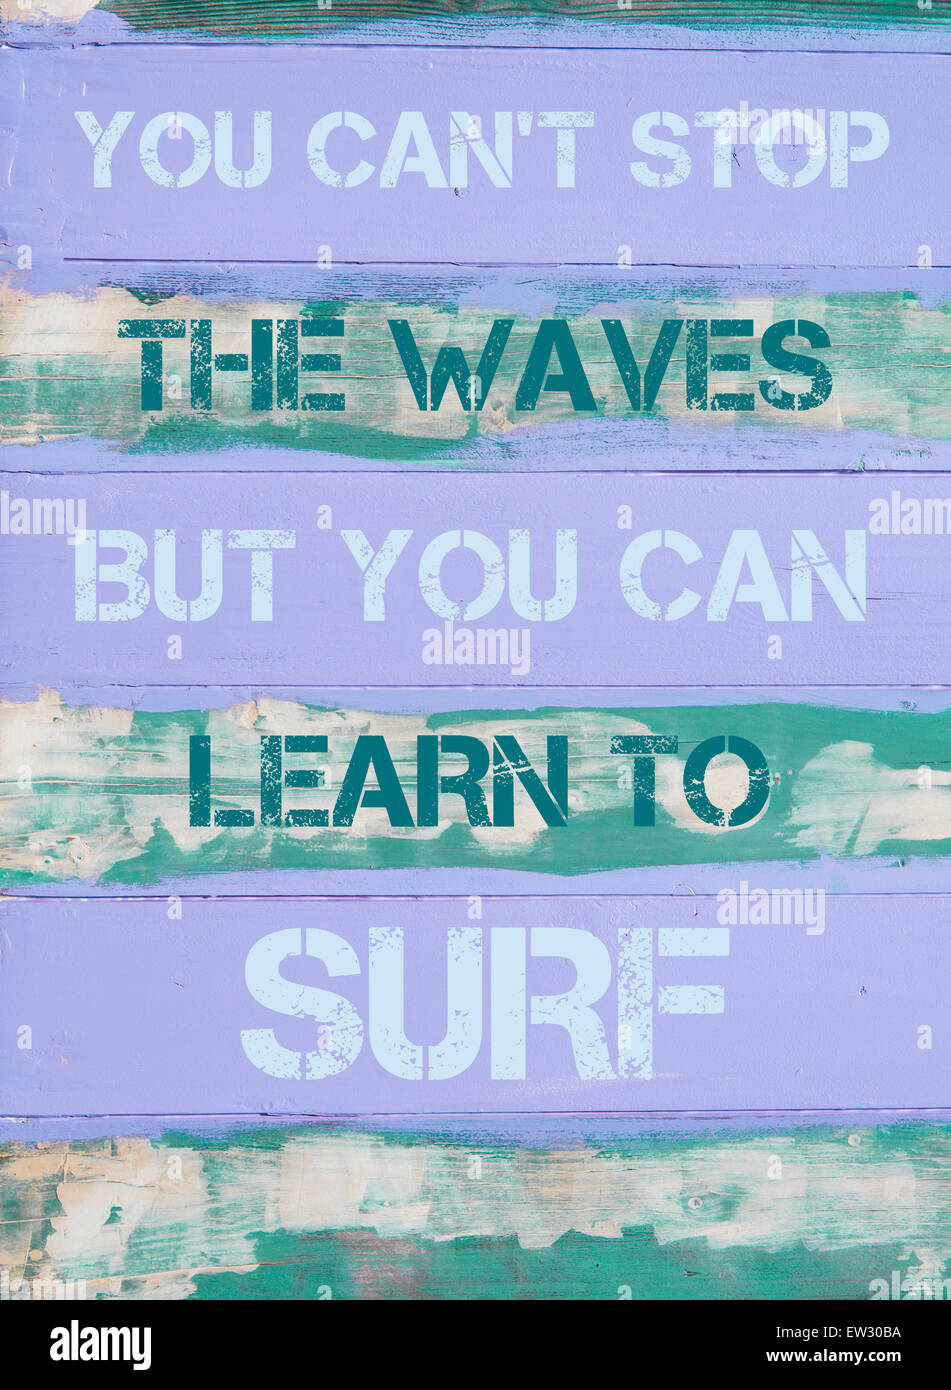 Concept Image Of You Can T Stop The Waves But You Can Learn To Surf Stock Photo Alamy